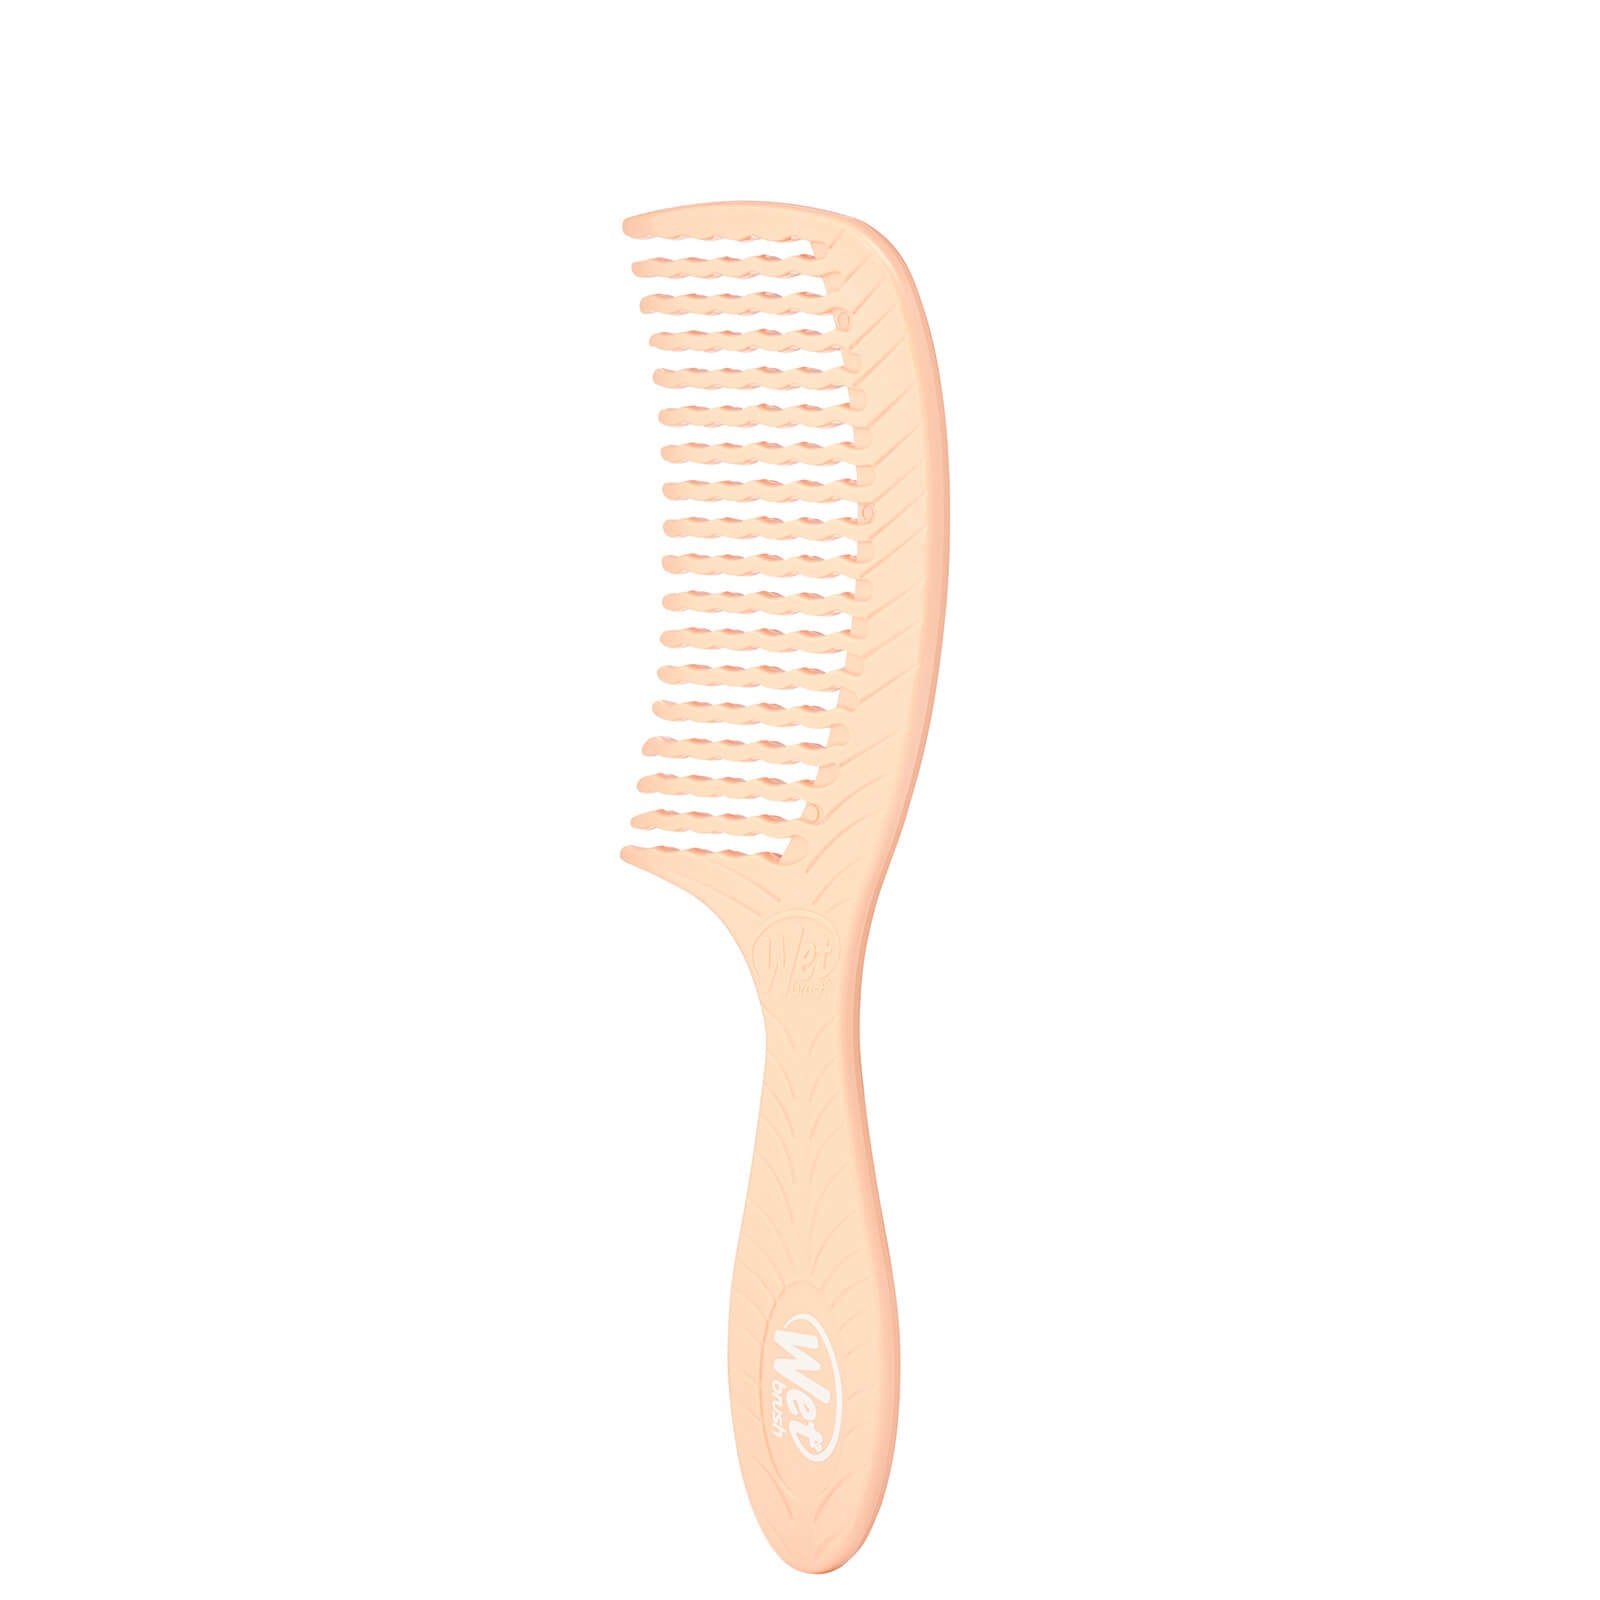 Wetbrush Go Green Coconut Oil Infused Comb - Blend Box